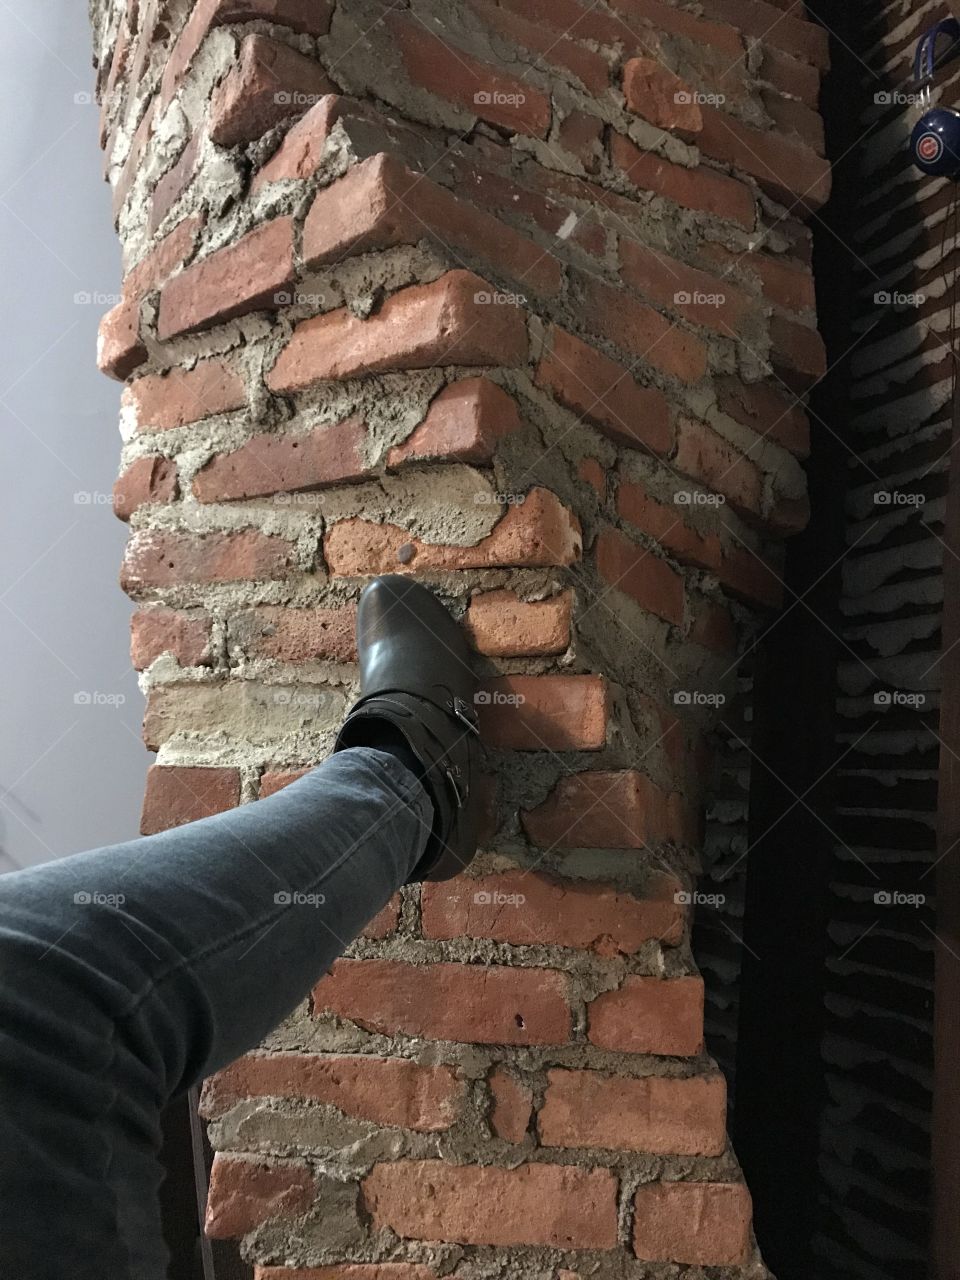 New Boots & a Dr Suess Chimney 